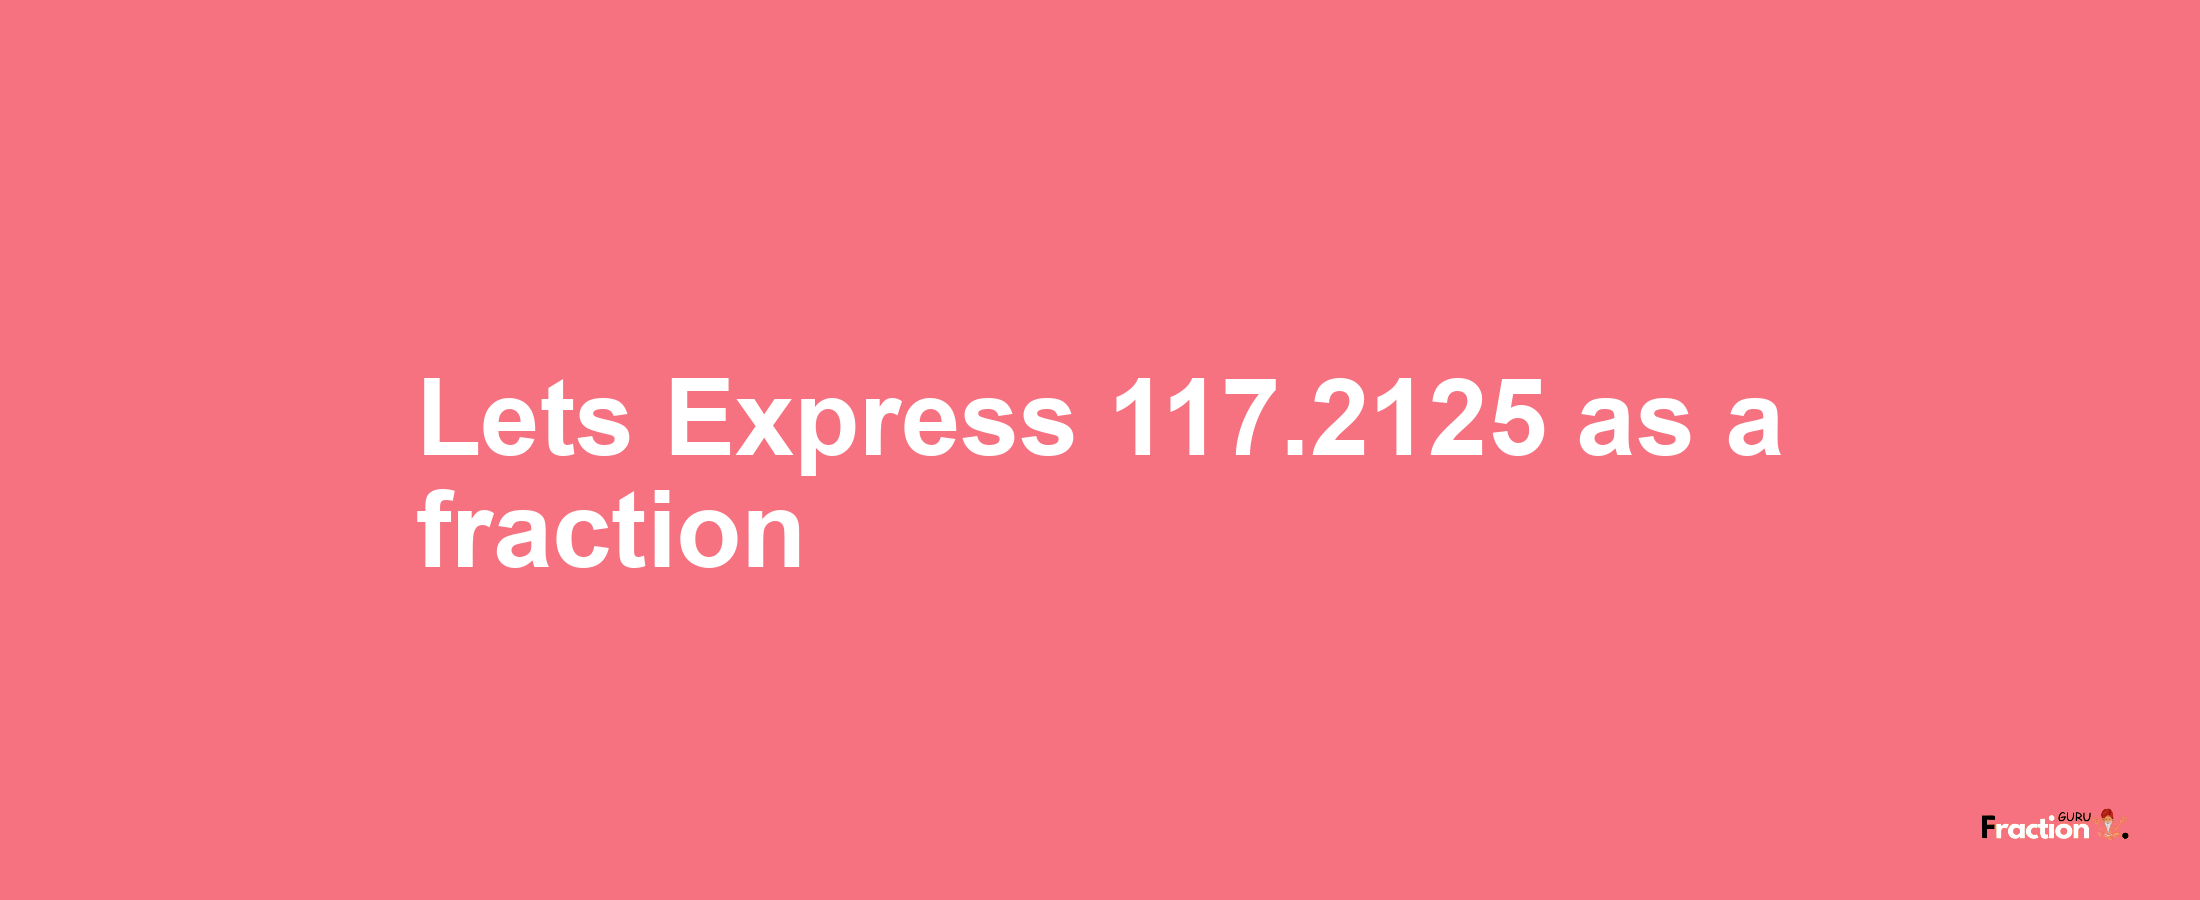 Lets Express 117.2125 as afraction